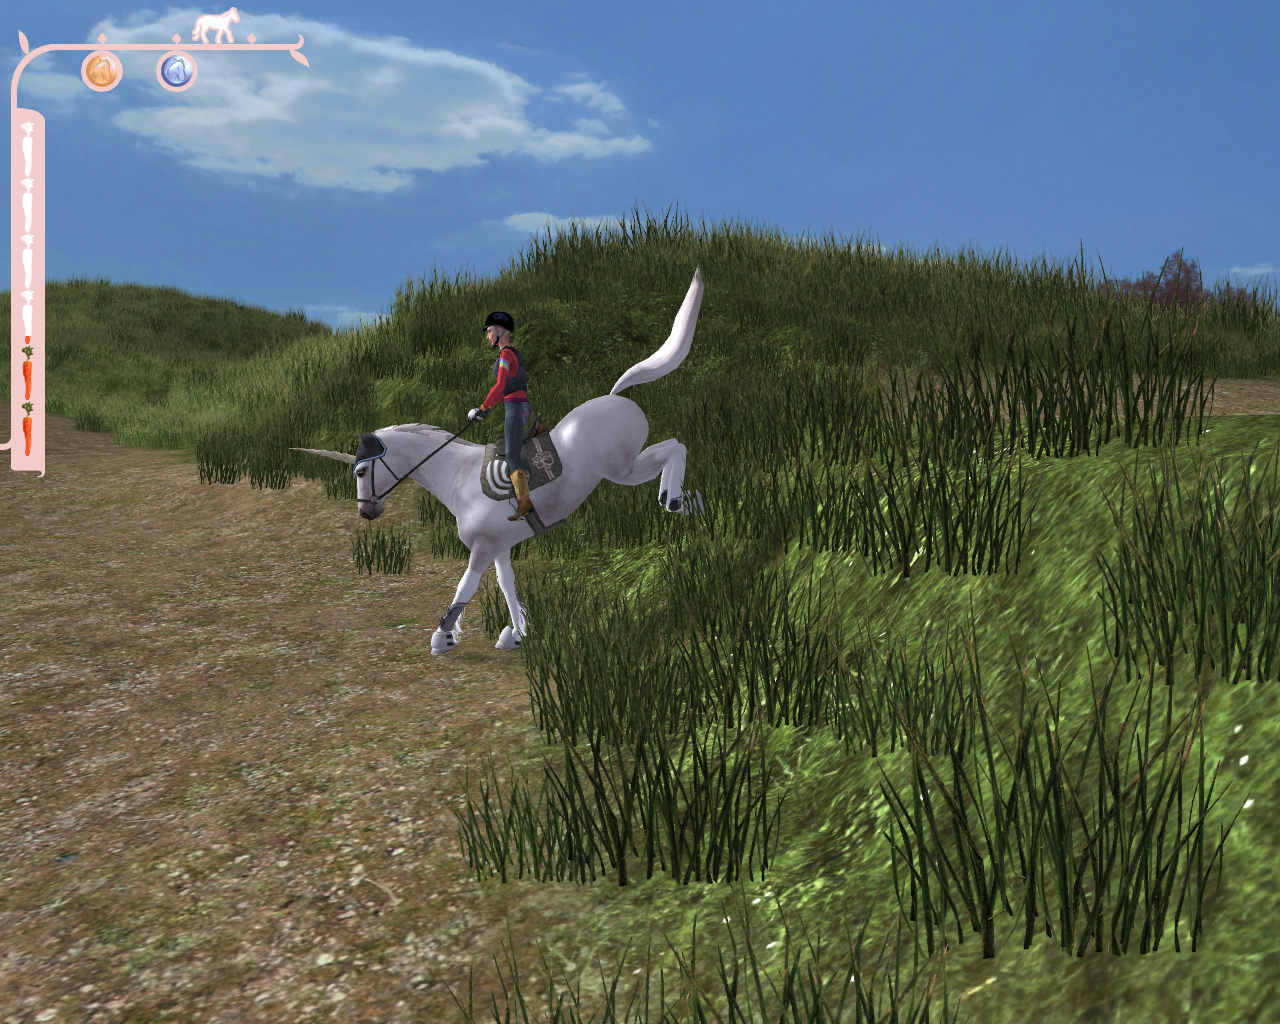 planet horse online free